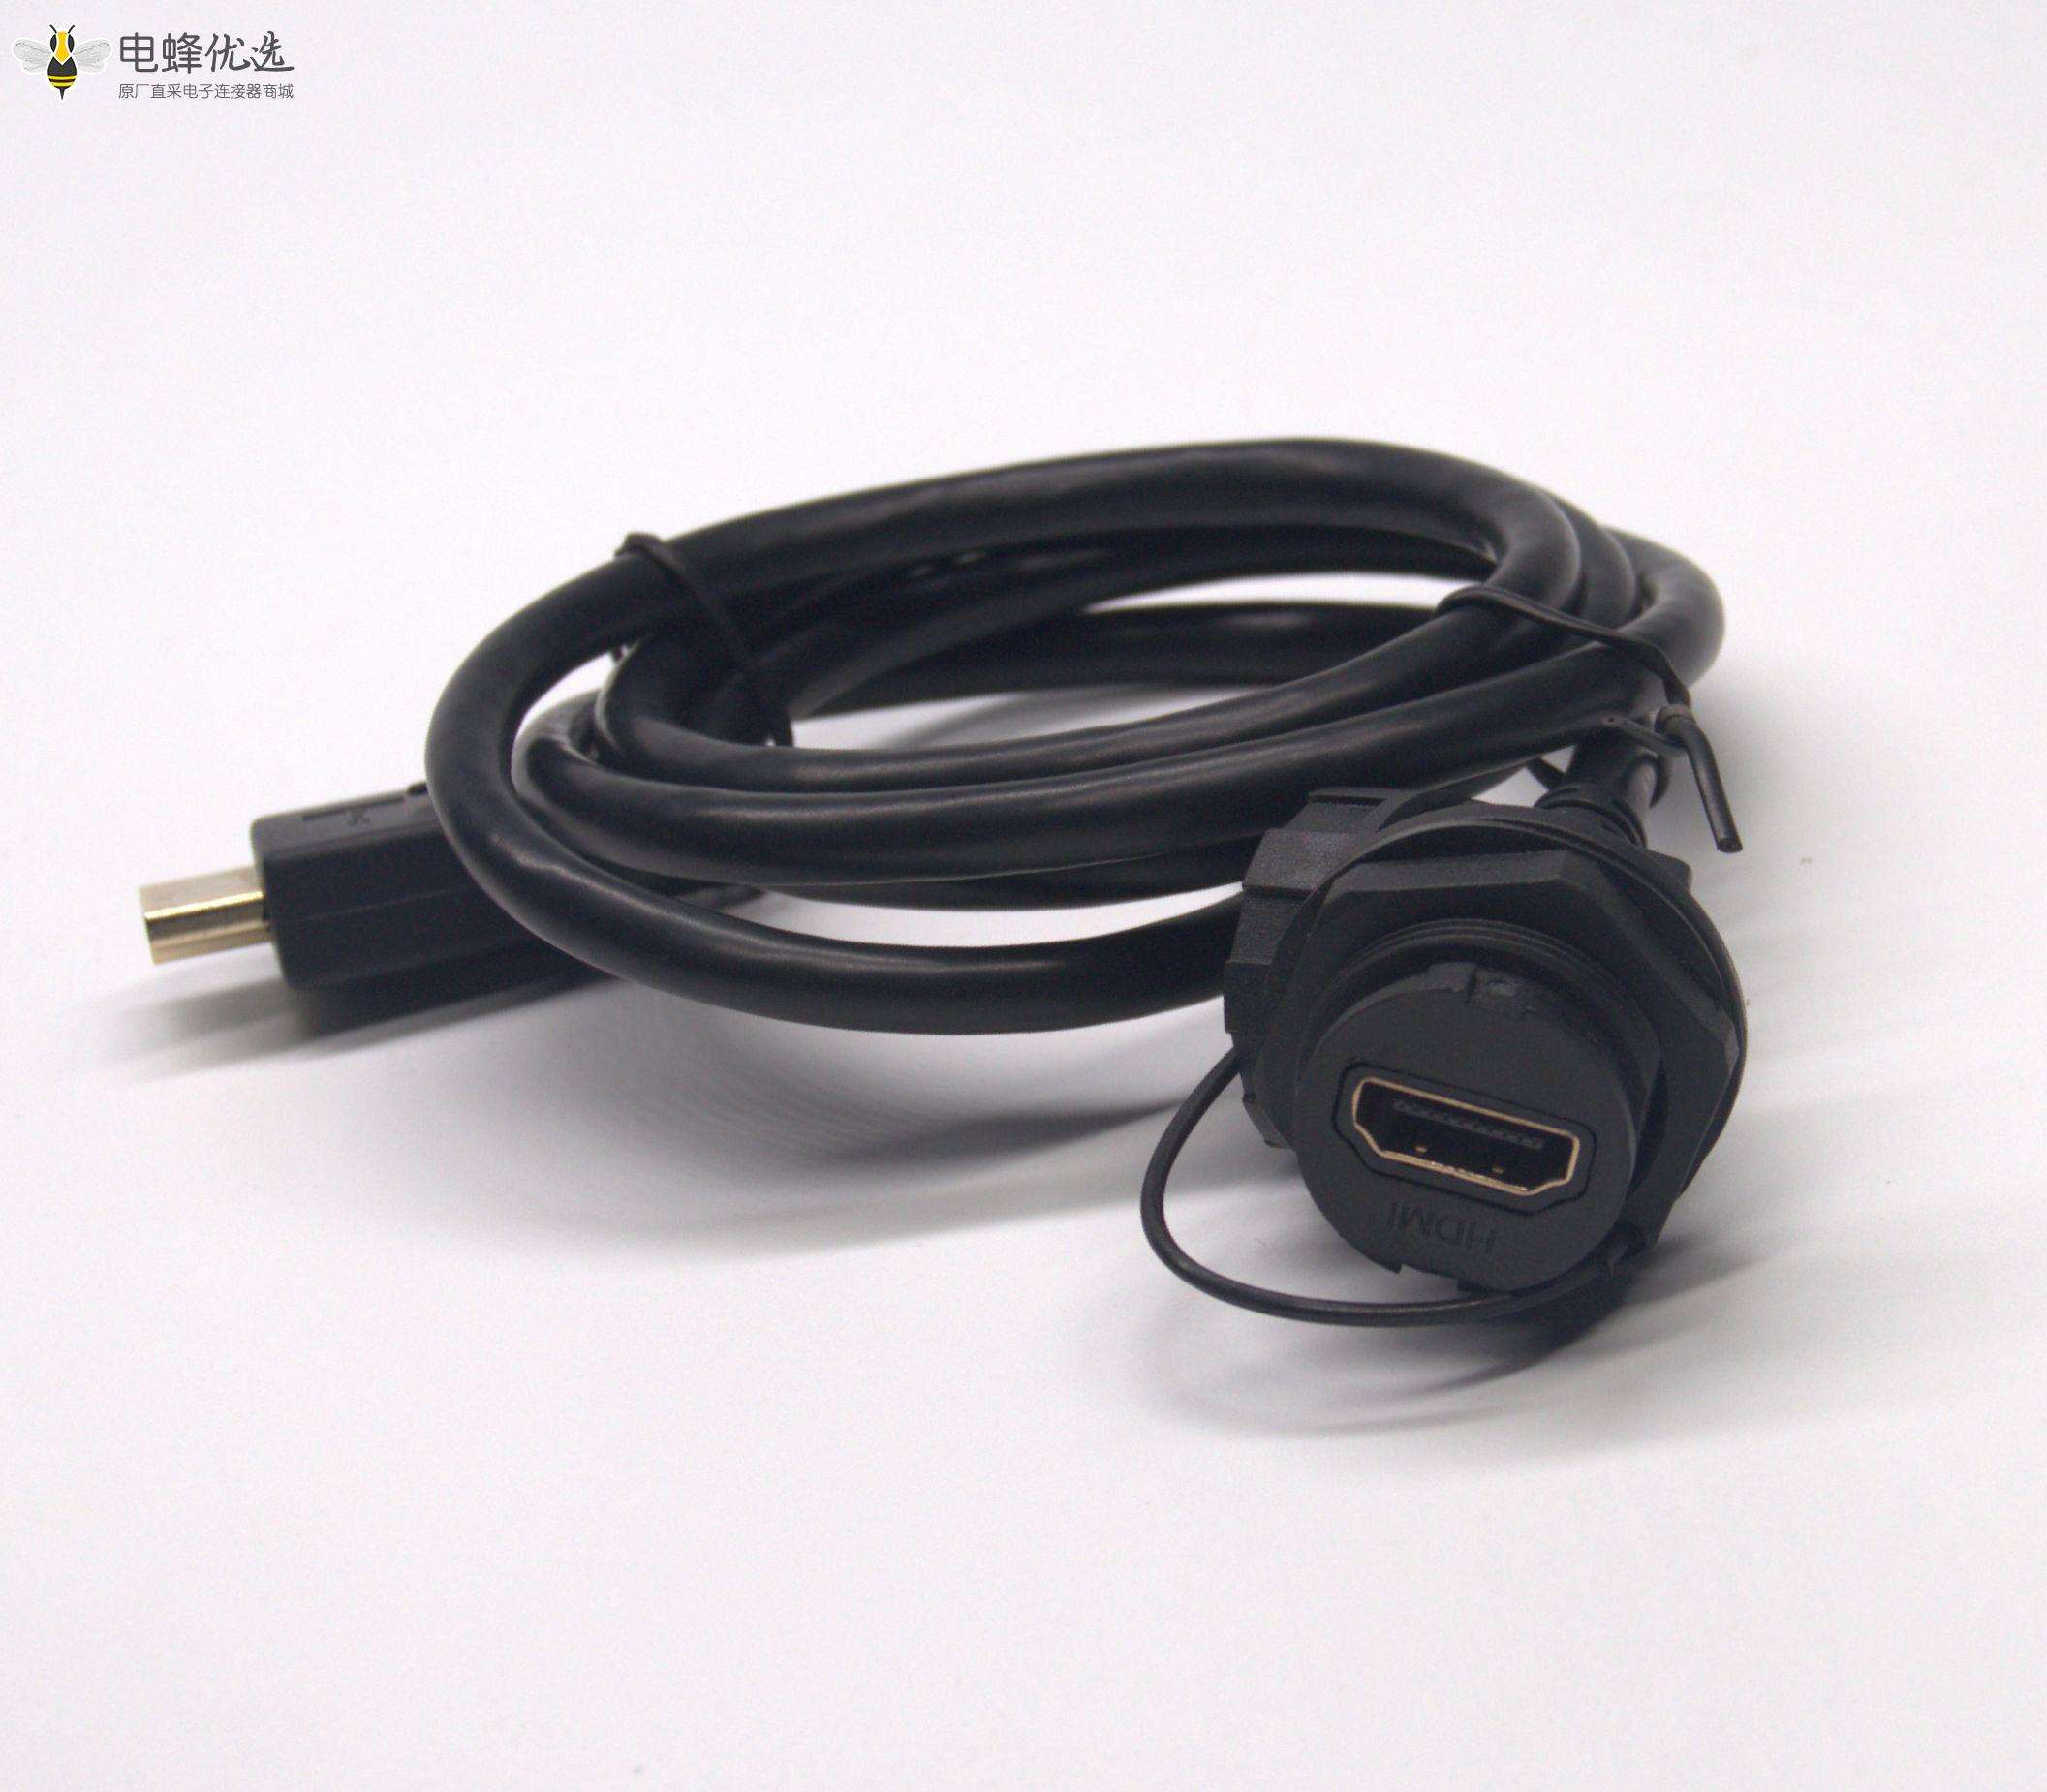 HDMI 公 转 HDMI 母 防水 线长100cm IP67 Waterproof cable